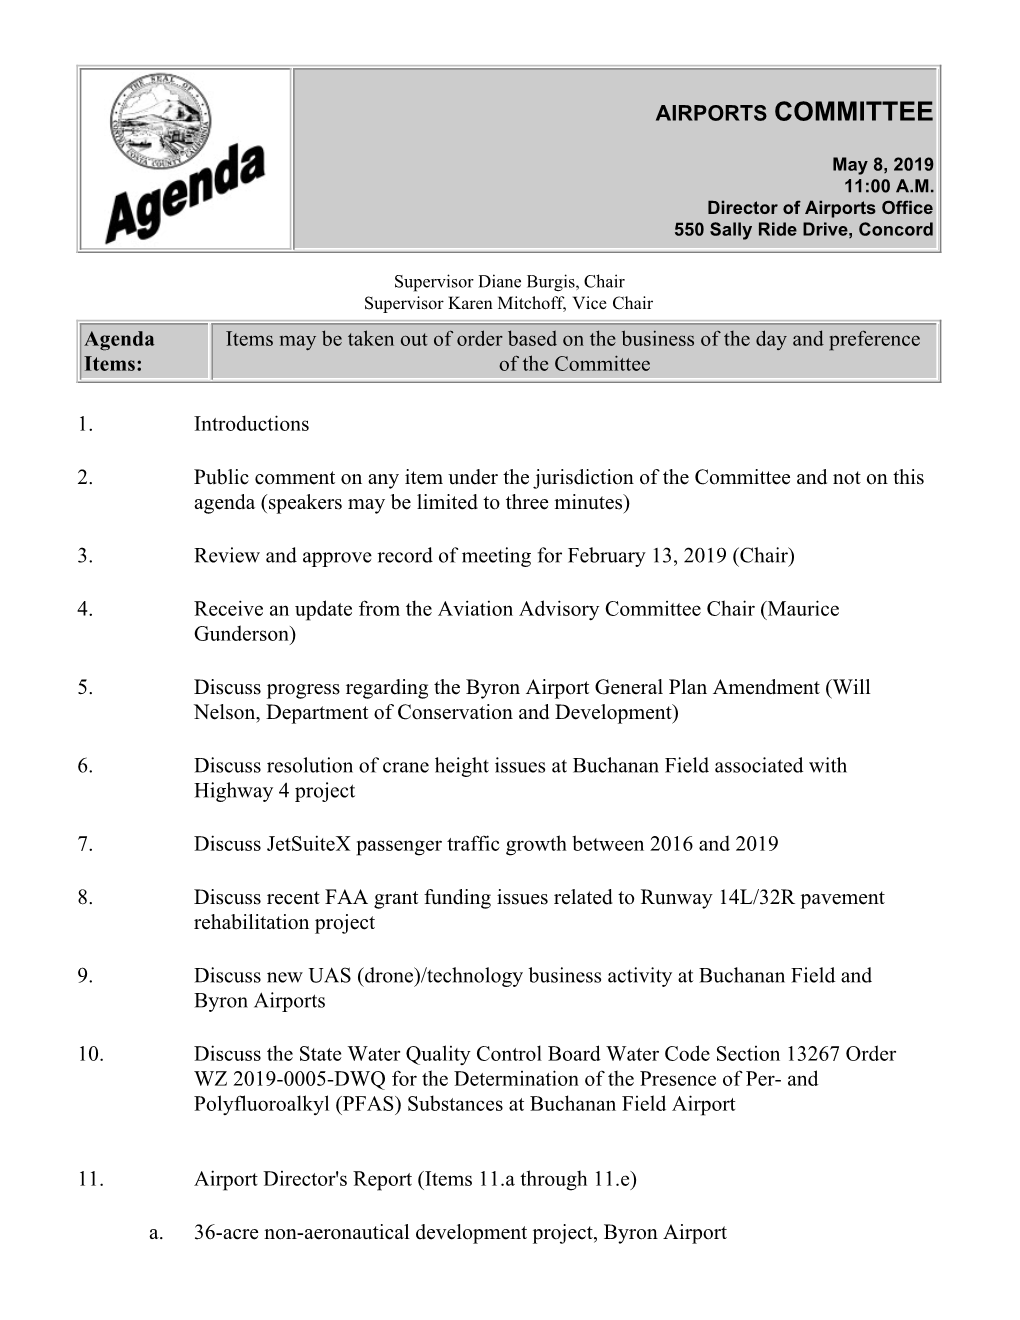 AIRPORTS COMMITTEE Agenda Items: Items May Be Taken out of Order Based on the Business of the Day and Preference of the Committe